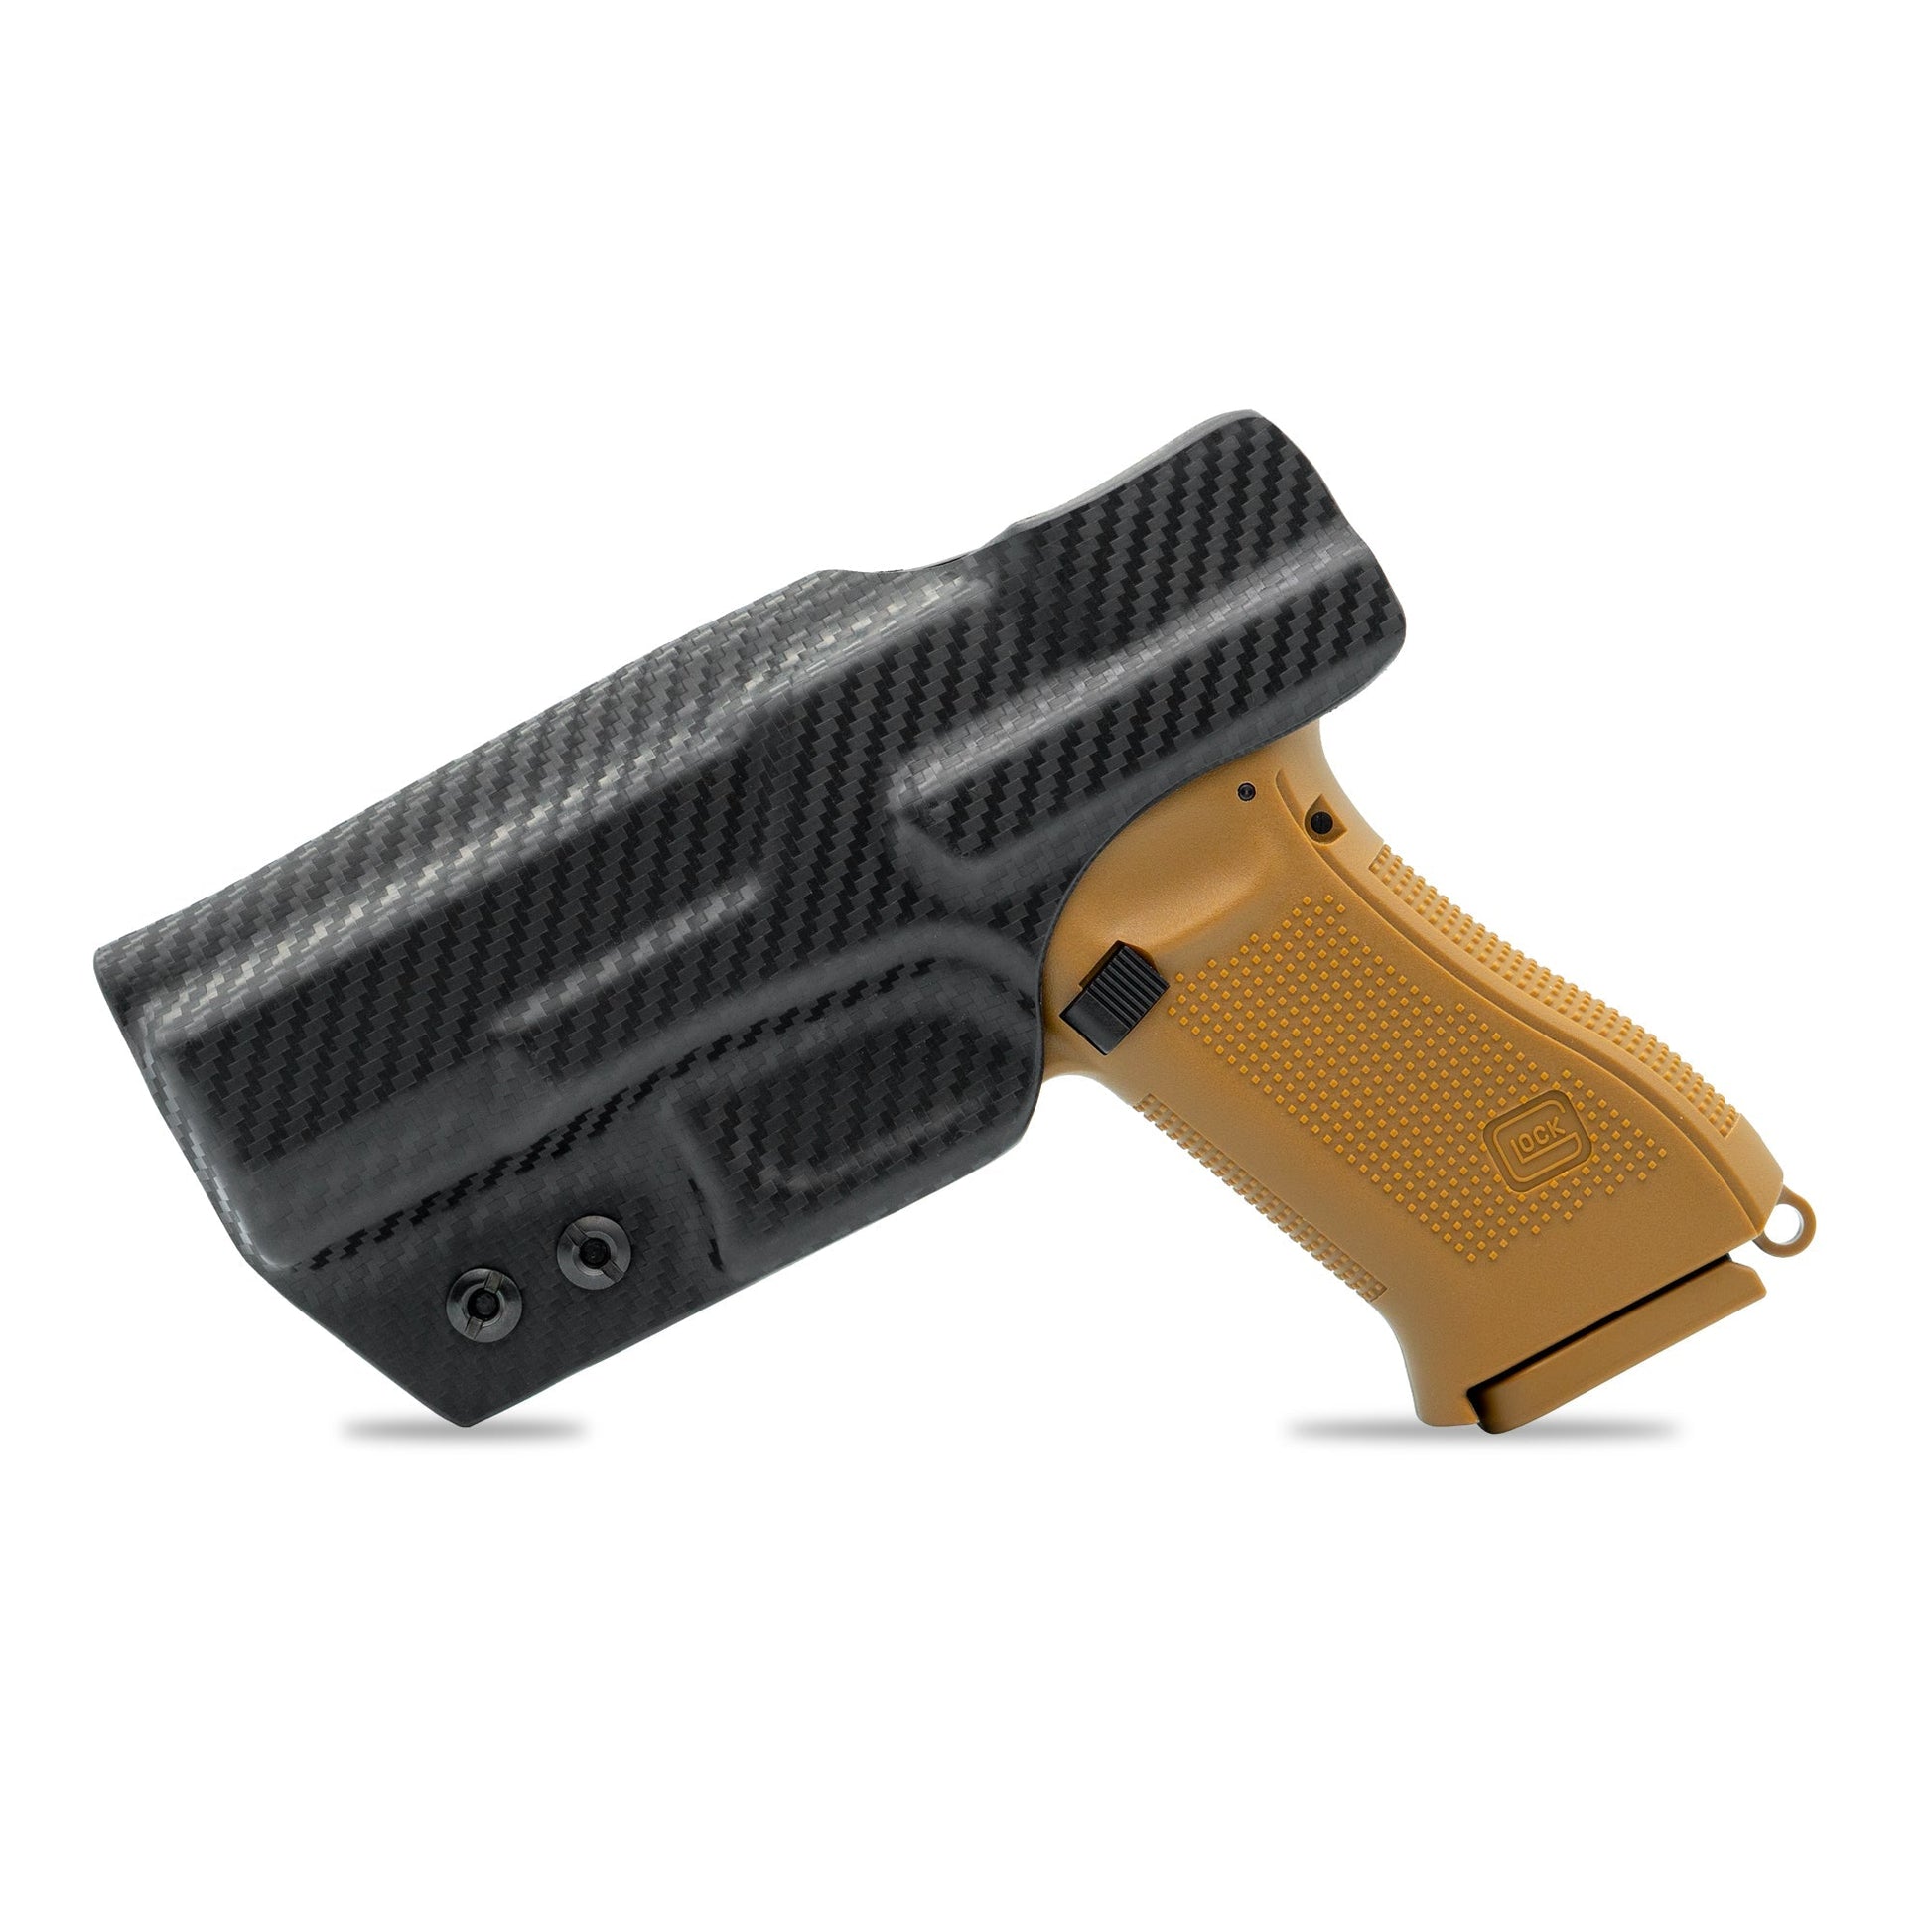 IWB Holster for the Springfield Hellcat, Hellcat OSP 9mm Clip & Carry